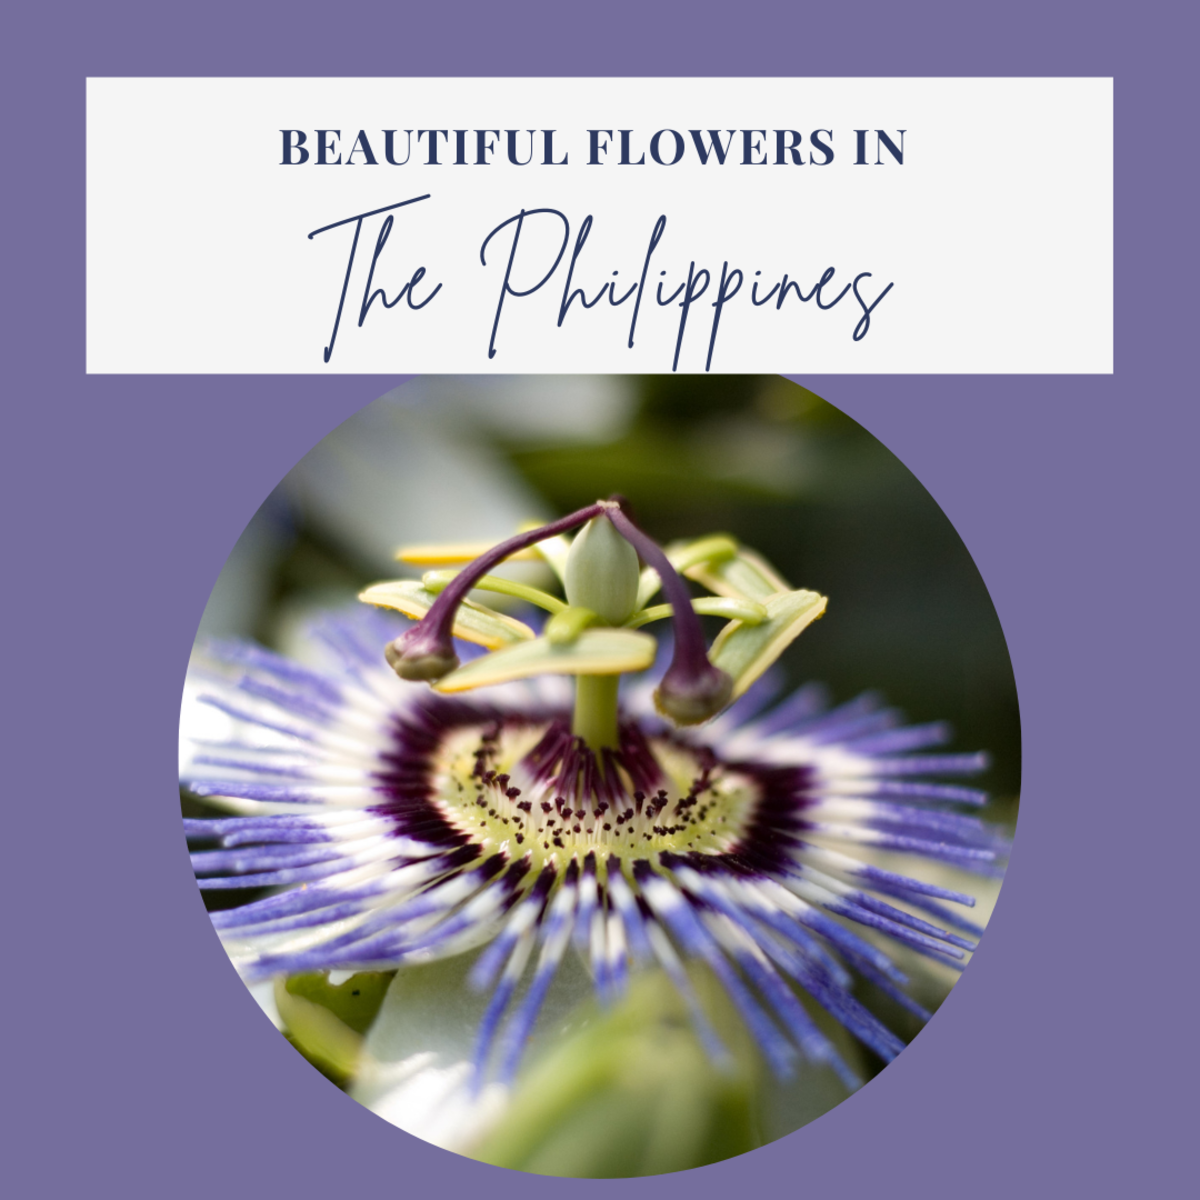 20 Most Beautiful Native Flowers of the Philippines